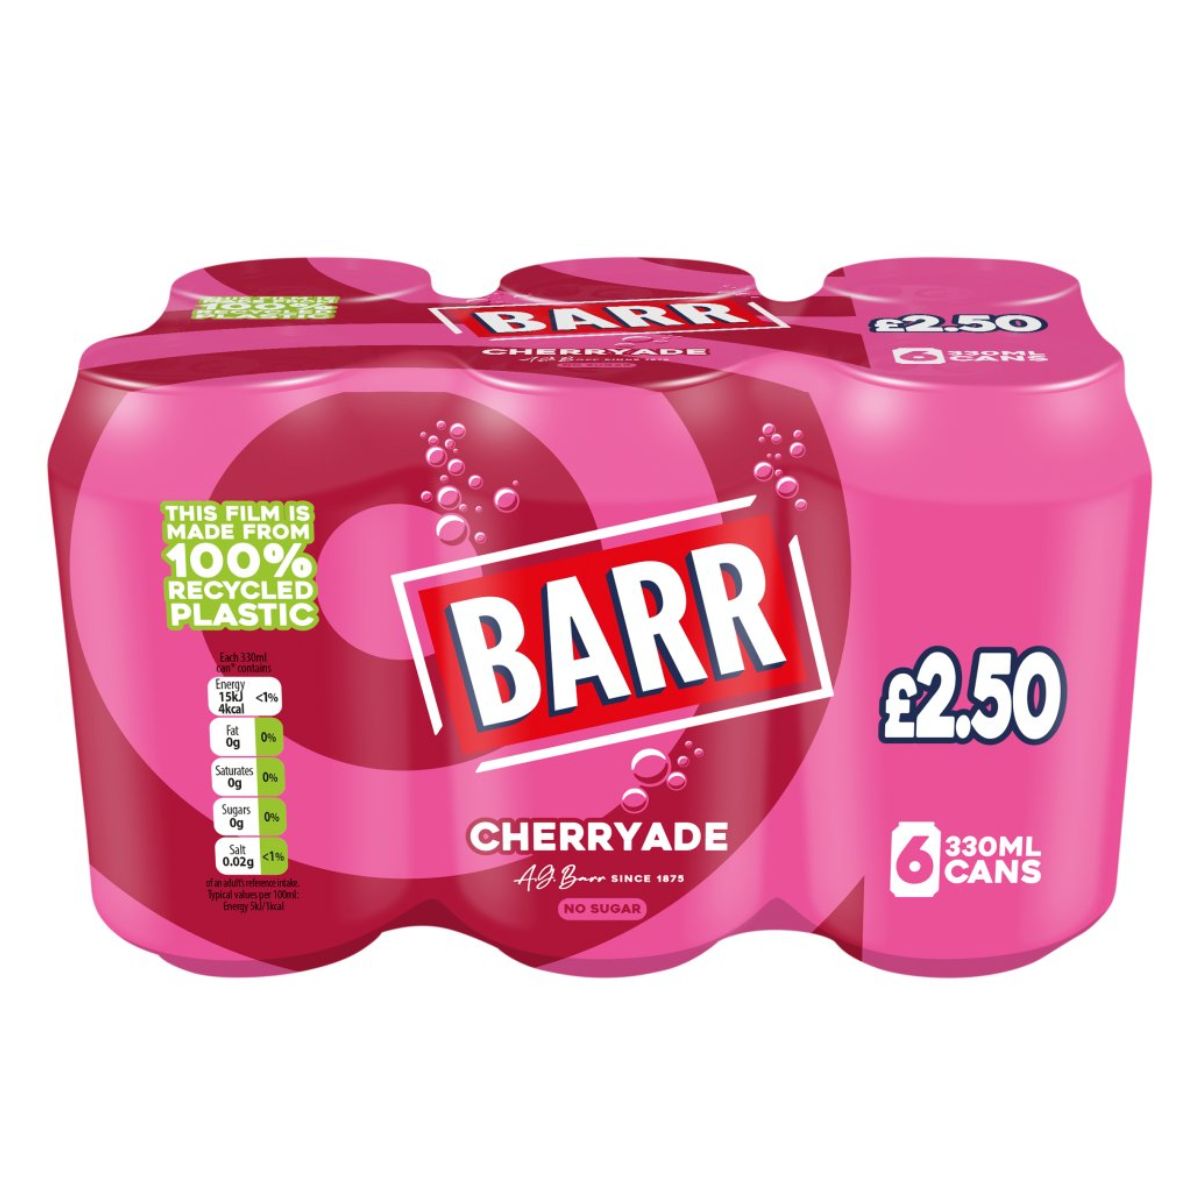 Six-pack of Barr cherryade cans, priced at £2.50, packaged in pink with a label indicating the film is made from recycled plastic.